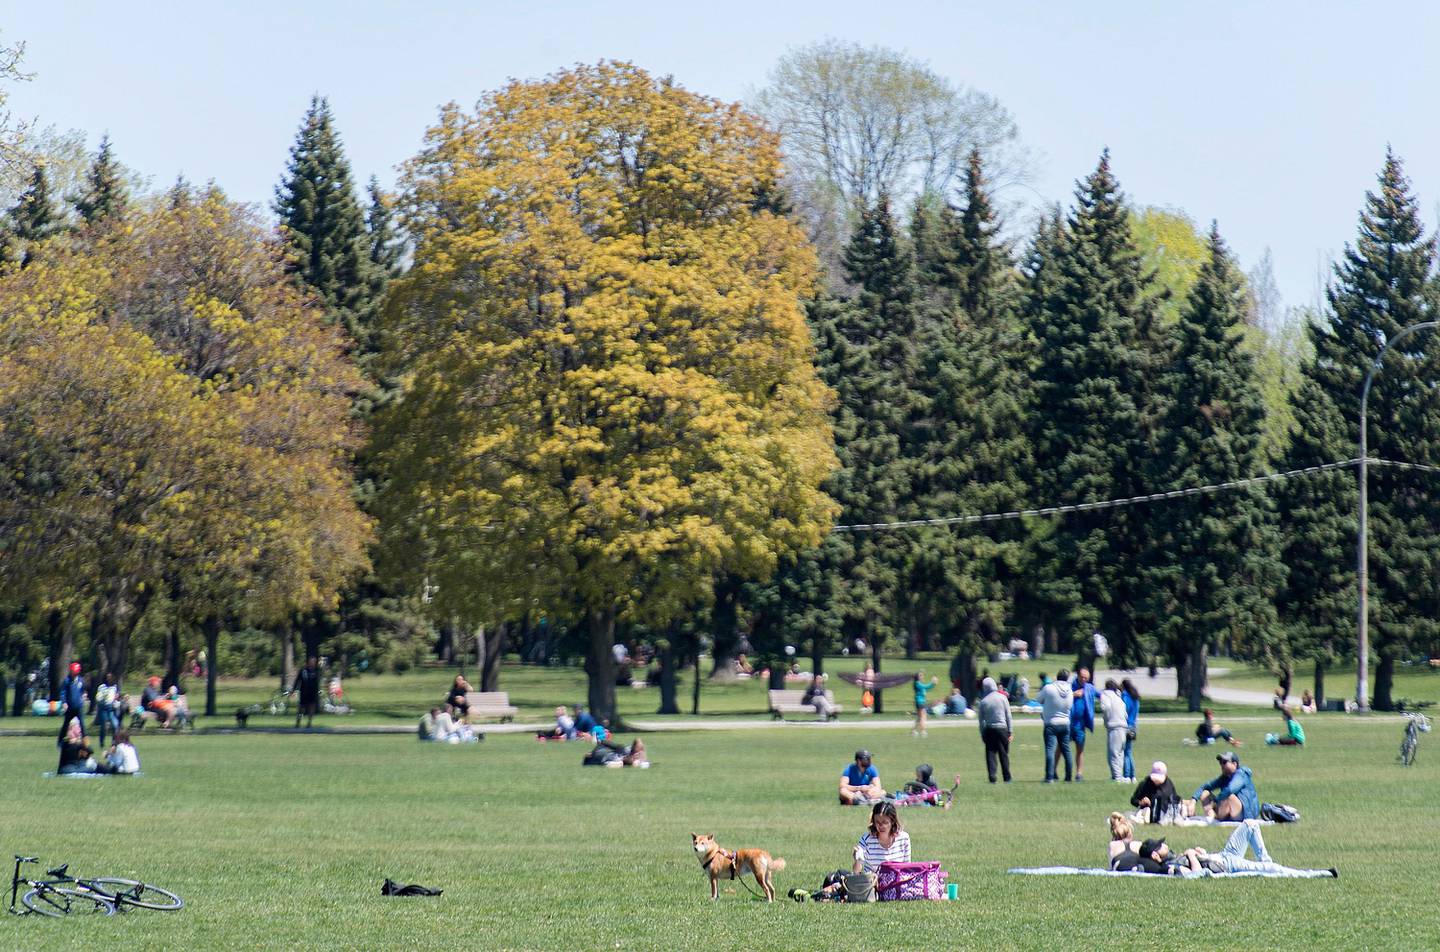 People gather in a city park on a warm sunny day in Montreal, Monday, May 18, 2020, as the COVID-19 pandemic continues in Canada and around the world. (Graham Hughes/The Canadian Press via AP)